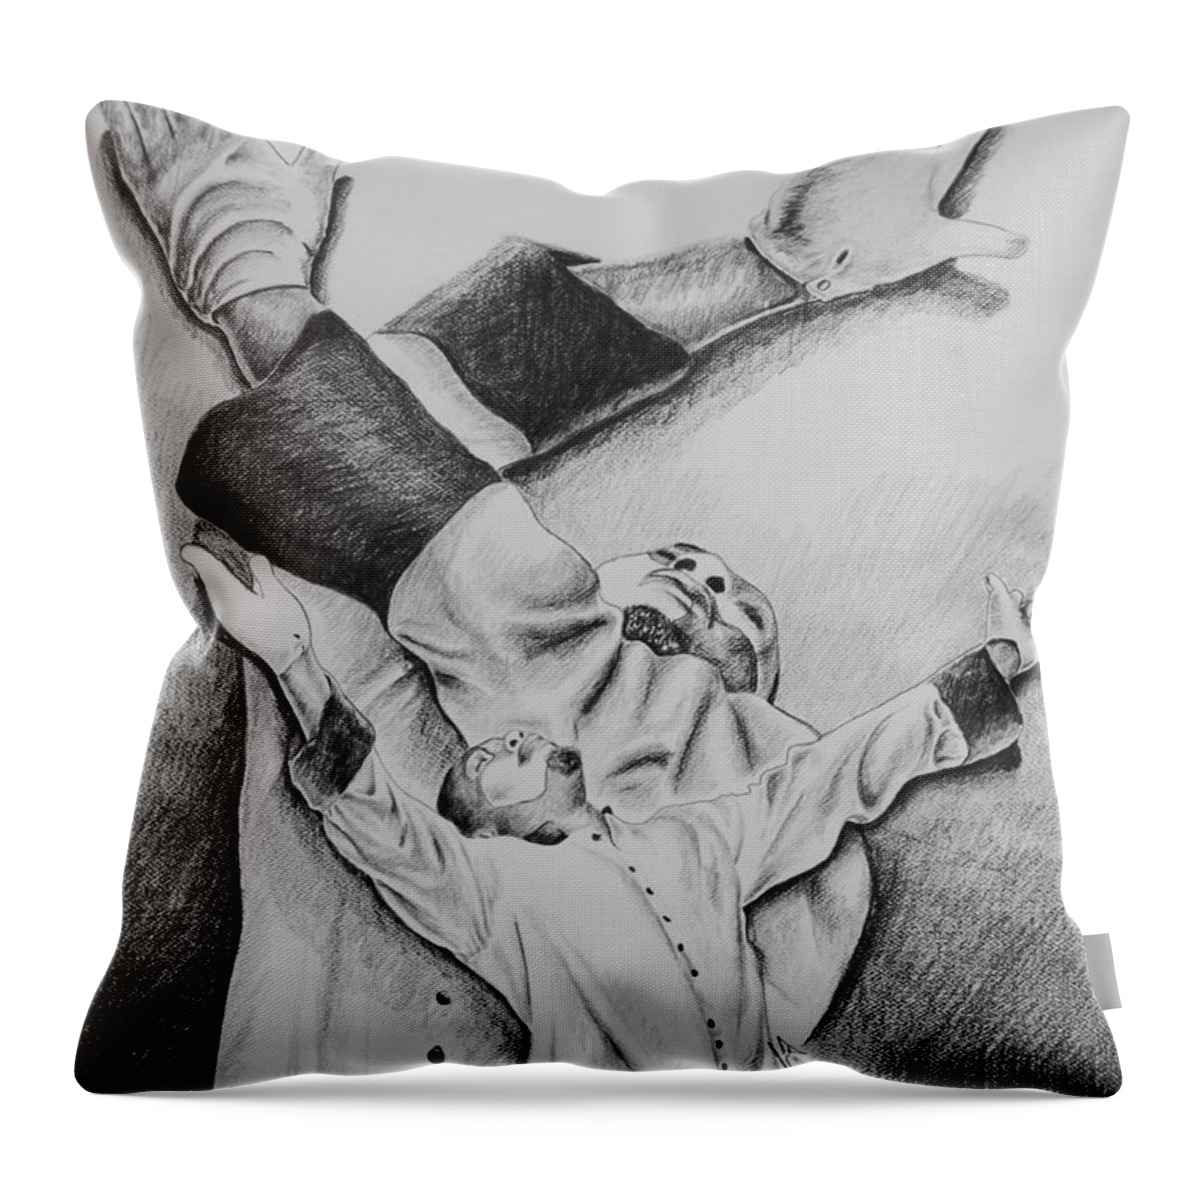 Black Art Throw Pillow featuring the drawing When Praises Go Up by Alphonso Edwards II